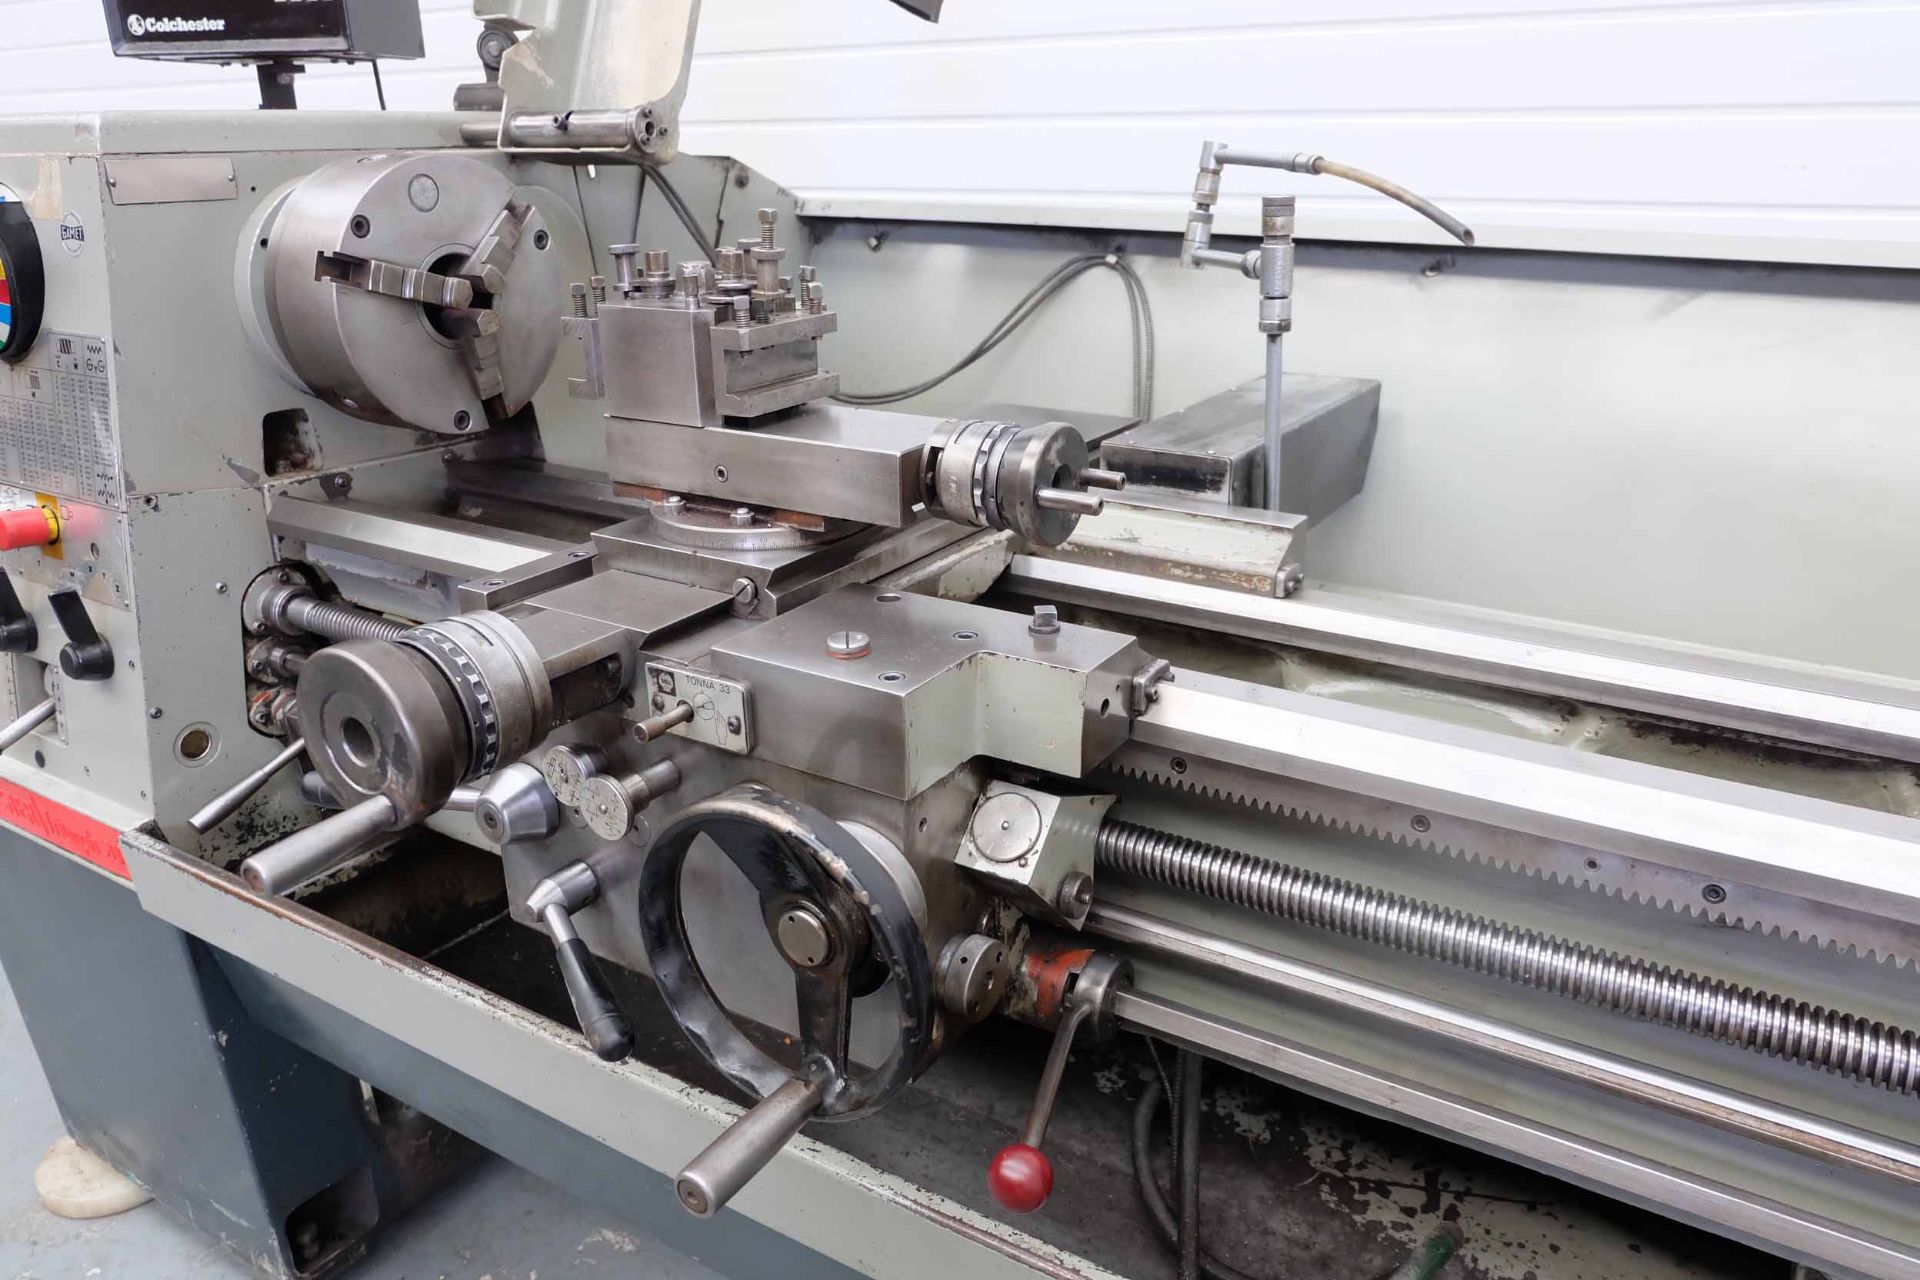 Colchester Triumph 2000 Gap Bed Centre Lathe. Admits Between Centres 50". Swing Over Bed 15 1/4". Sw - Image 7 of 10